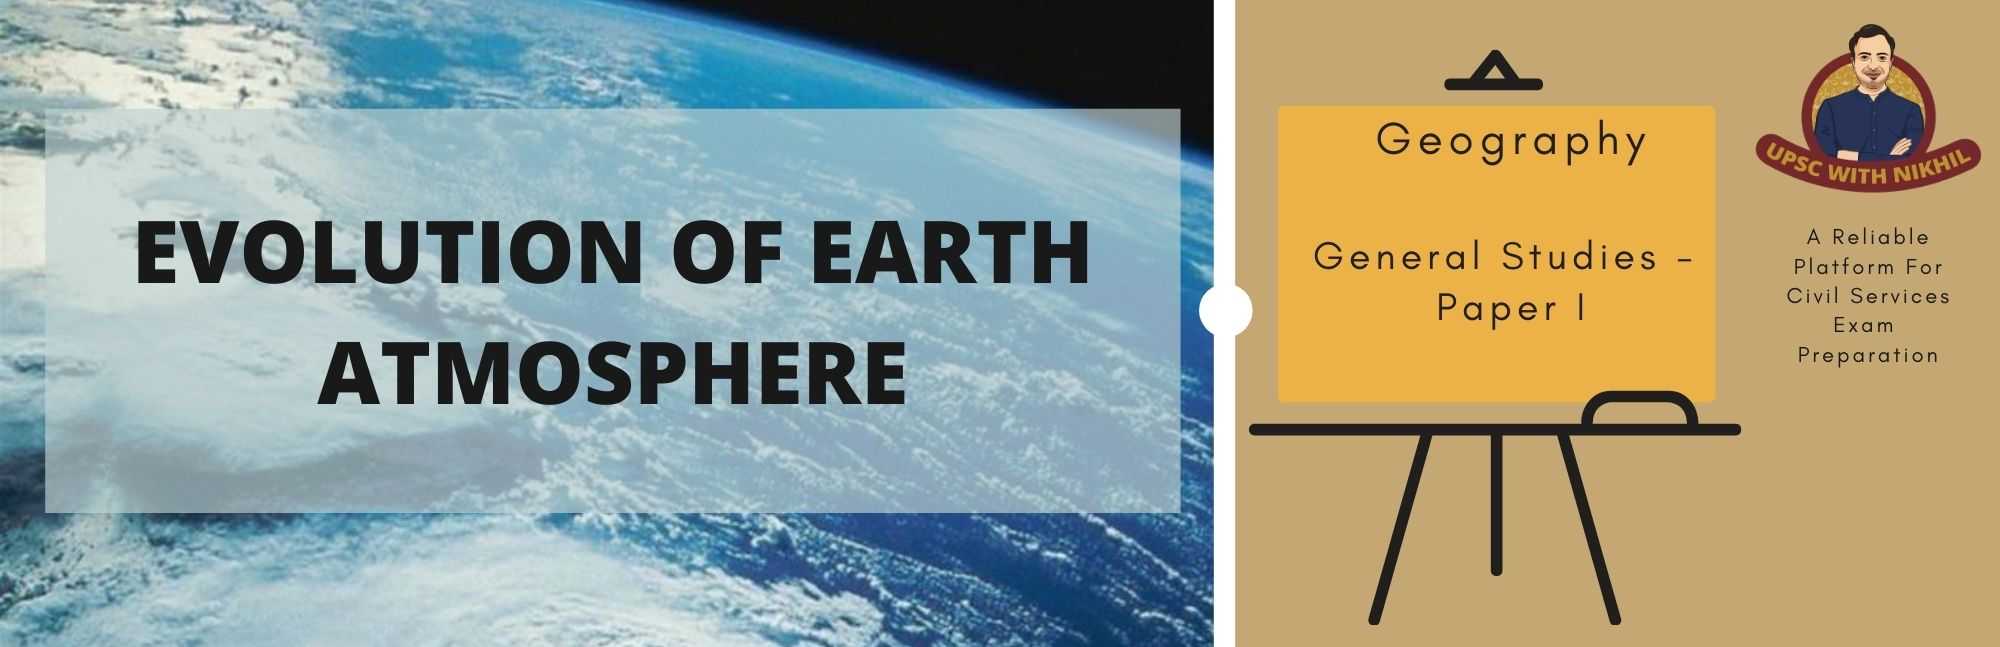 Evolution of Earth’s Atmosph